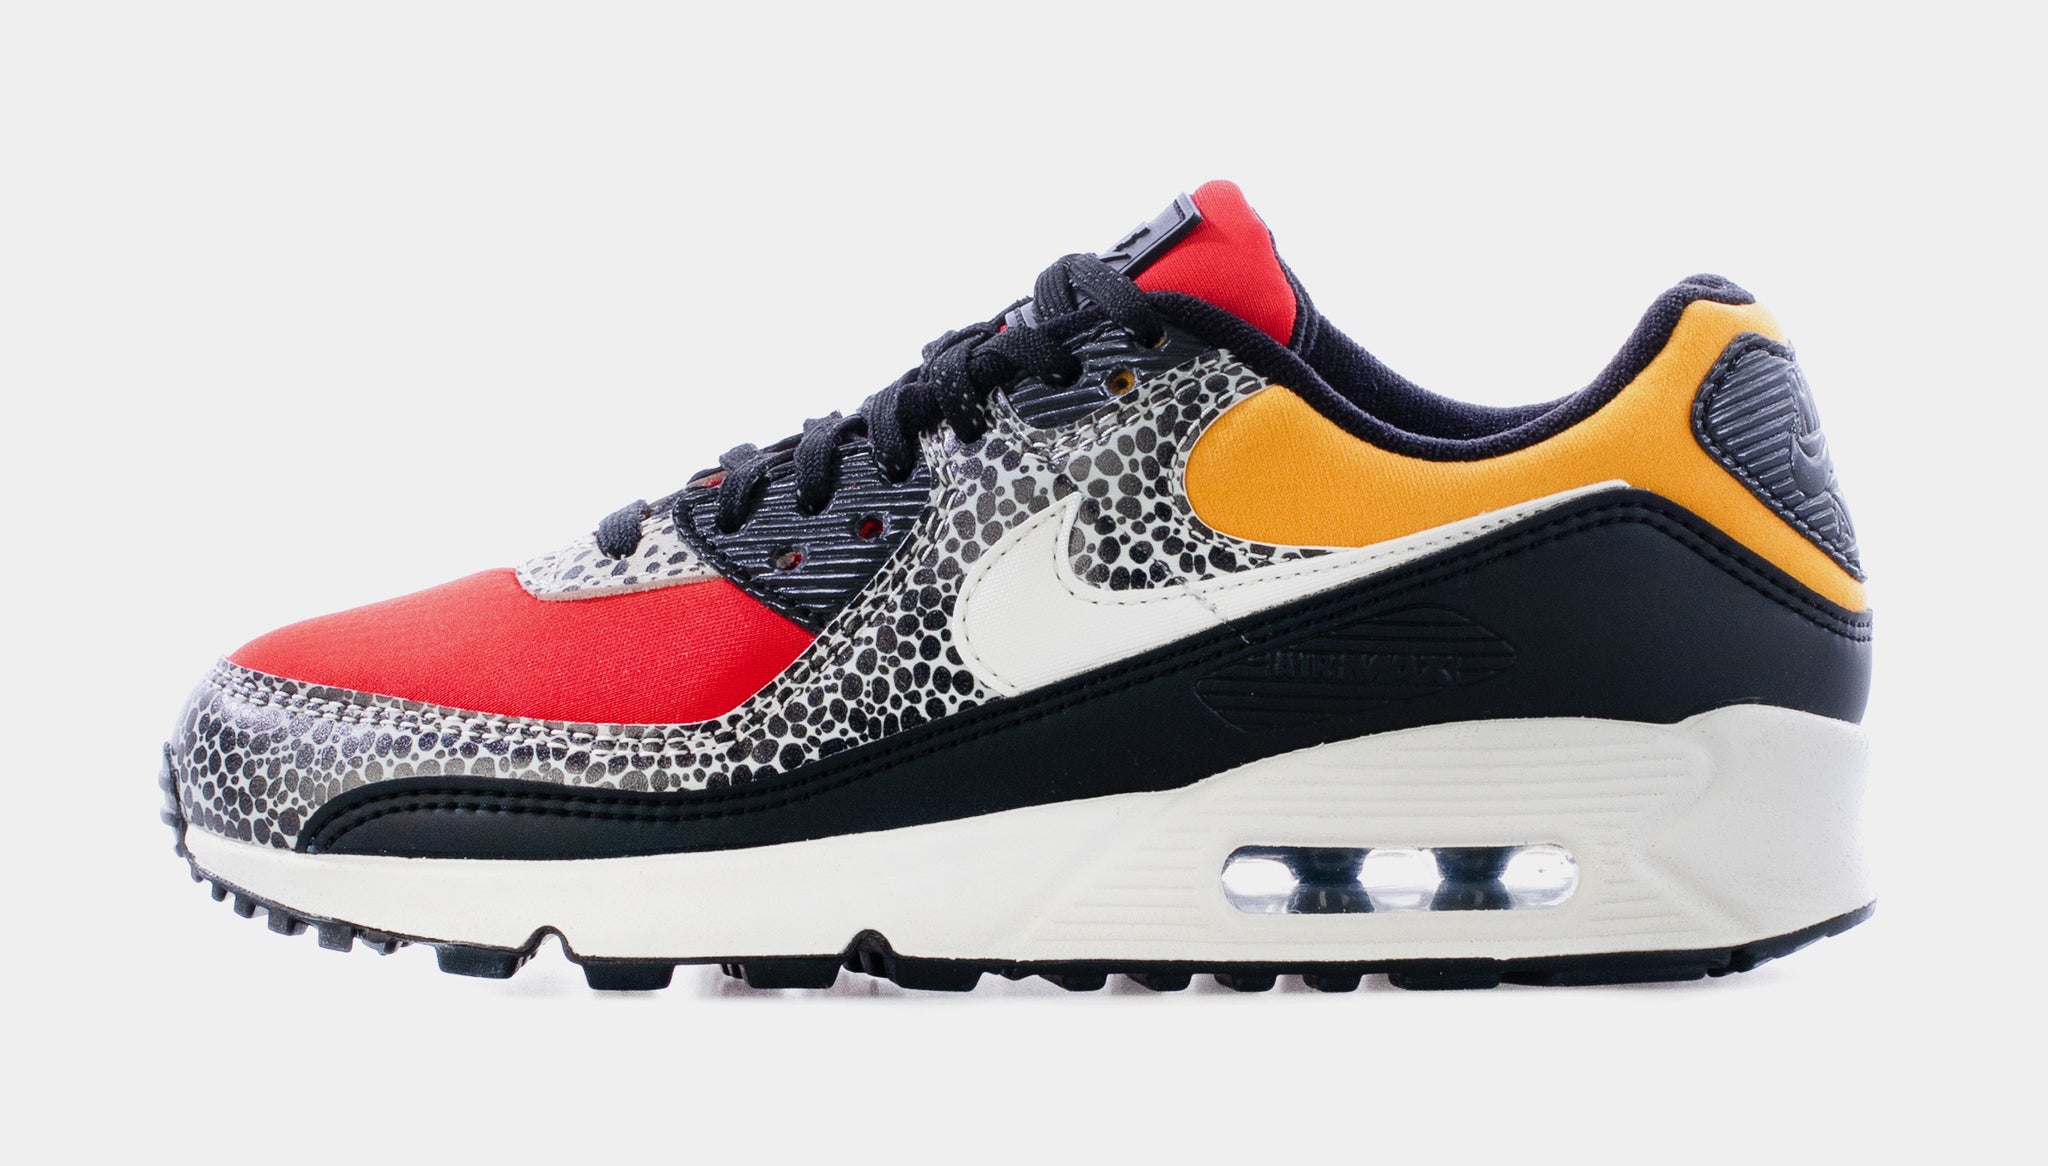 womens nike air max red and black